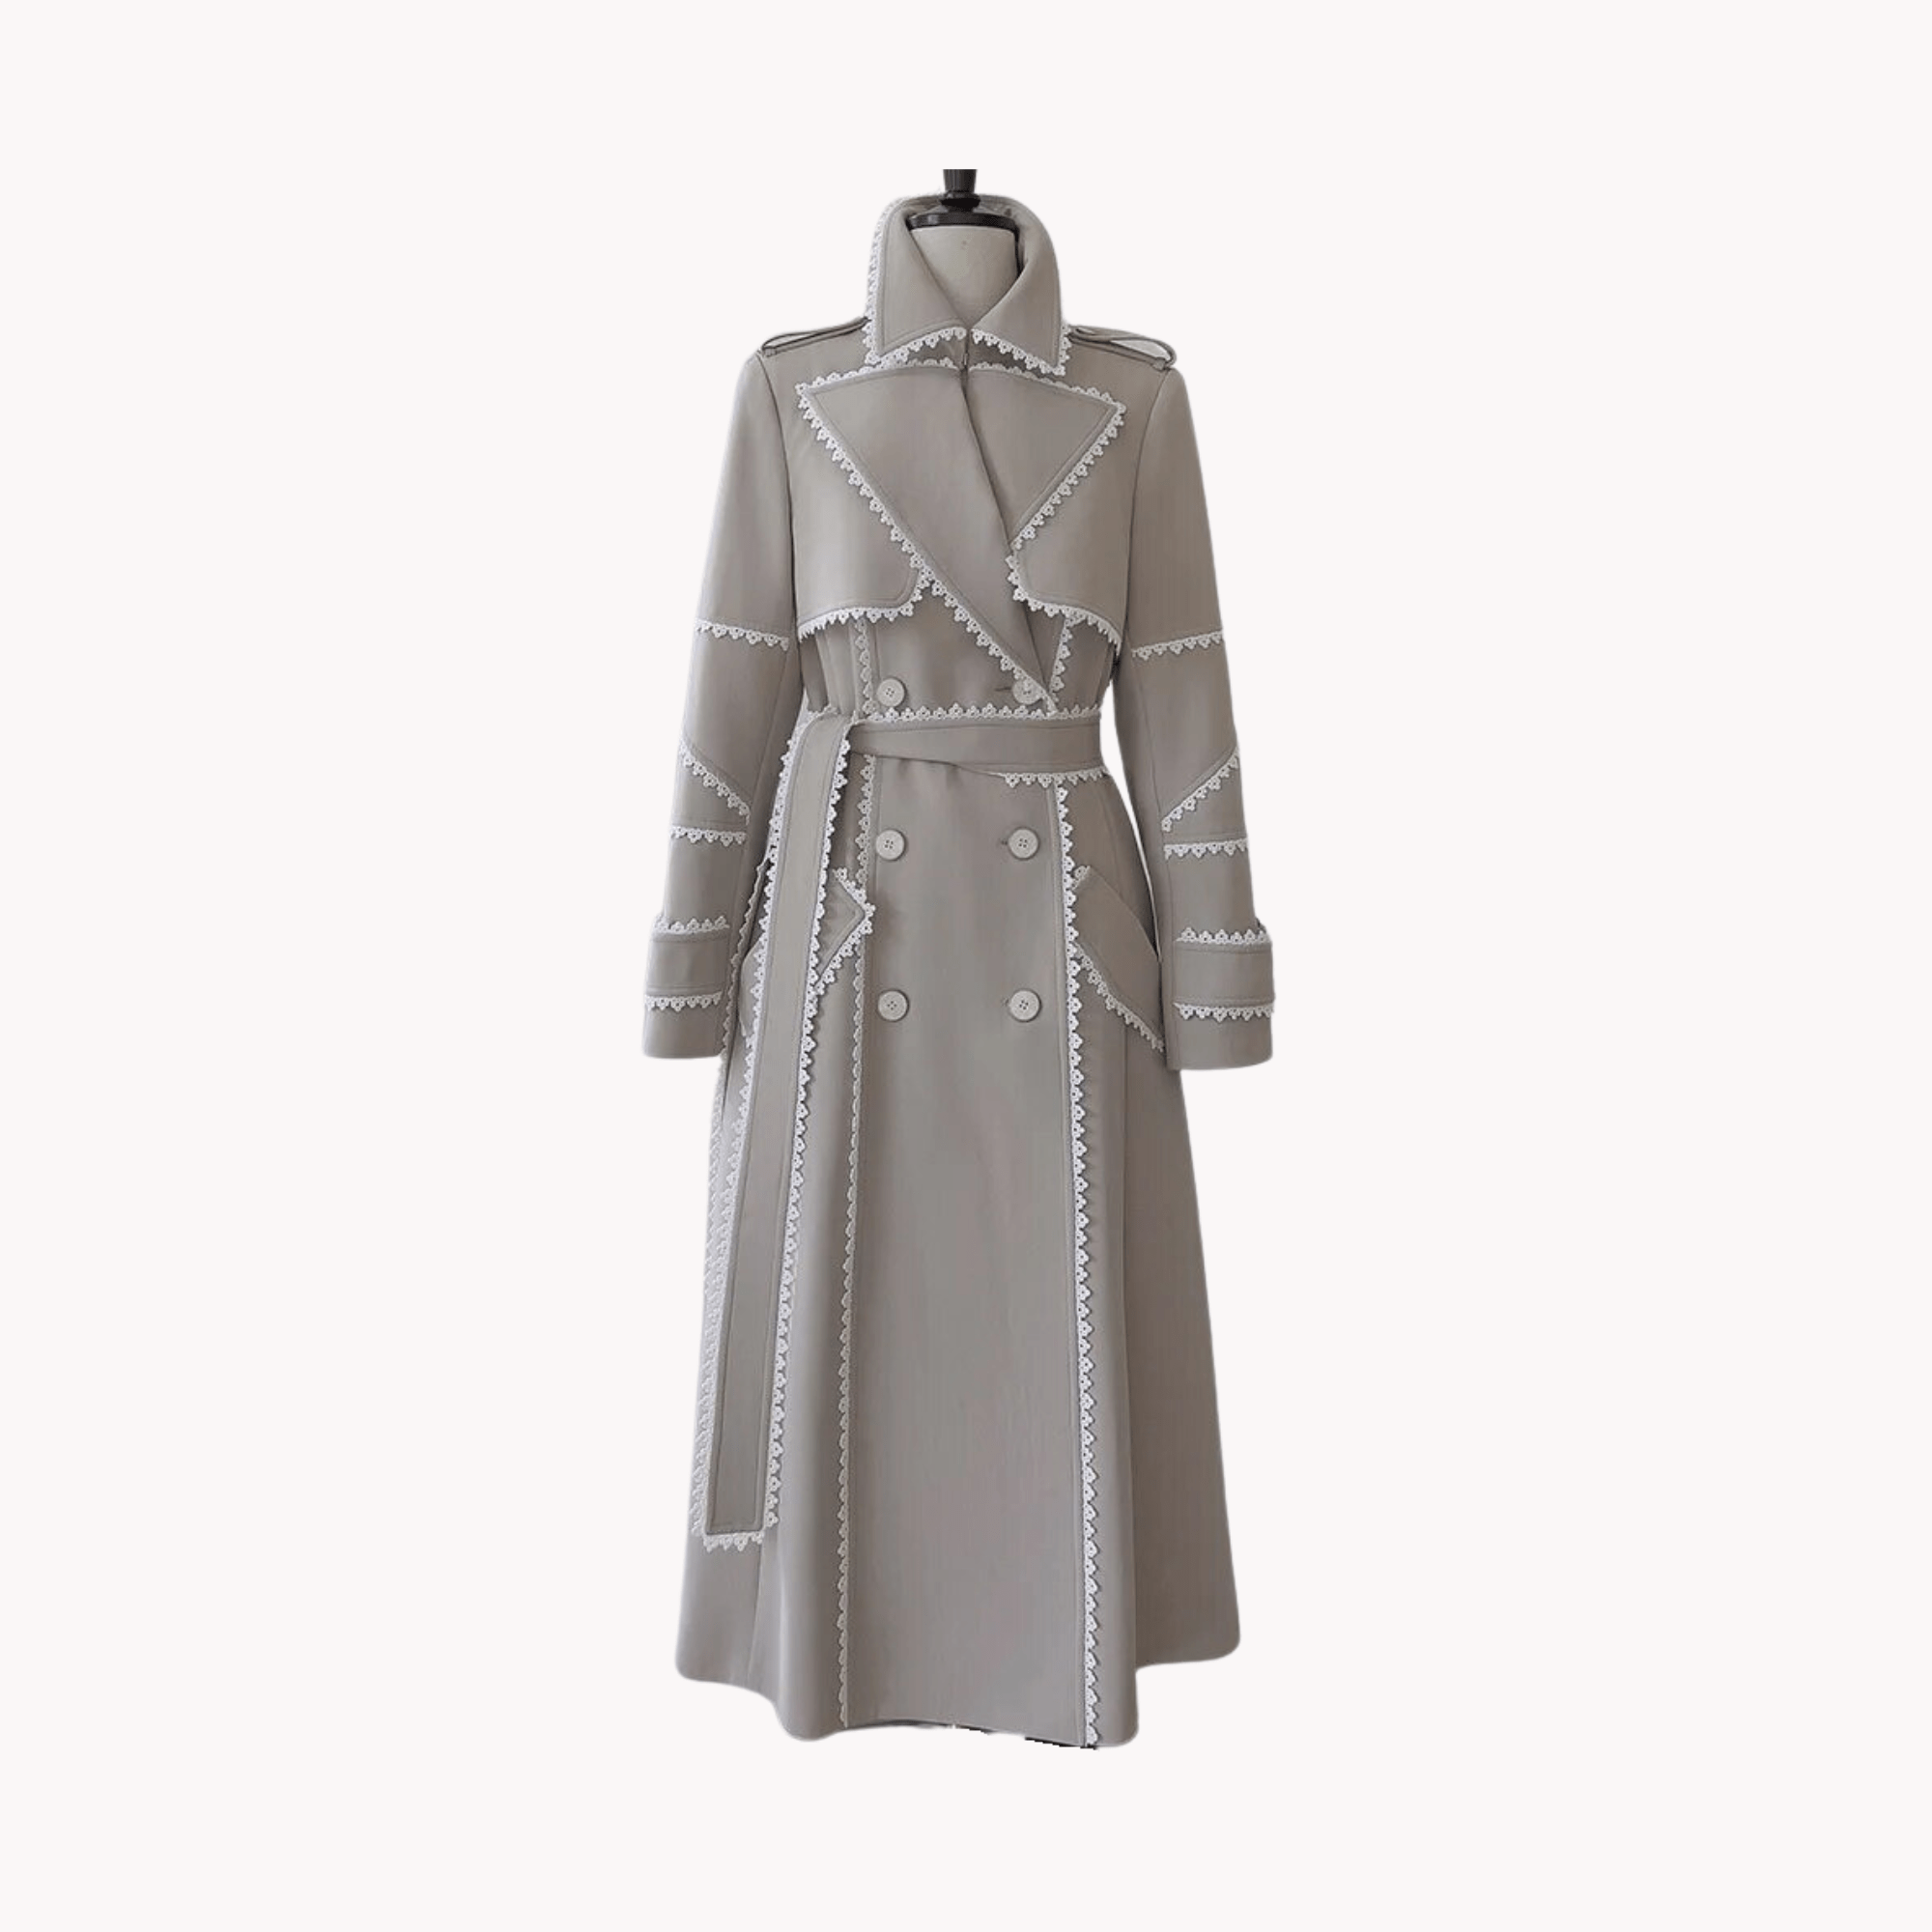 Lace Trimmed Belted Trench Coat - Kelly Obi New York